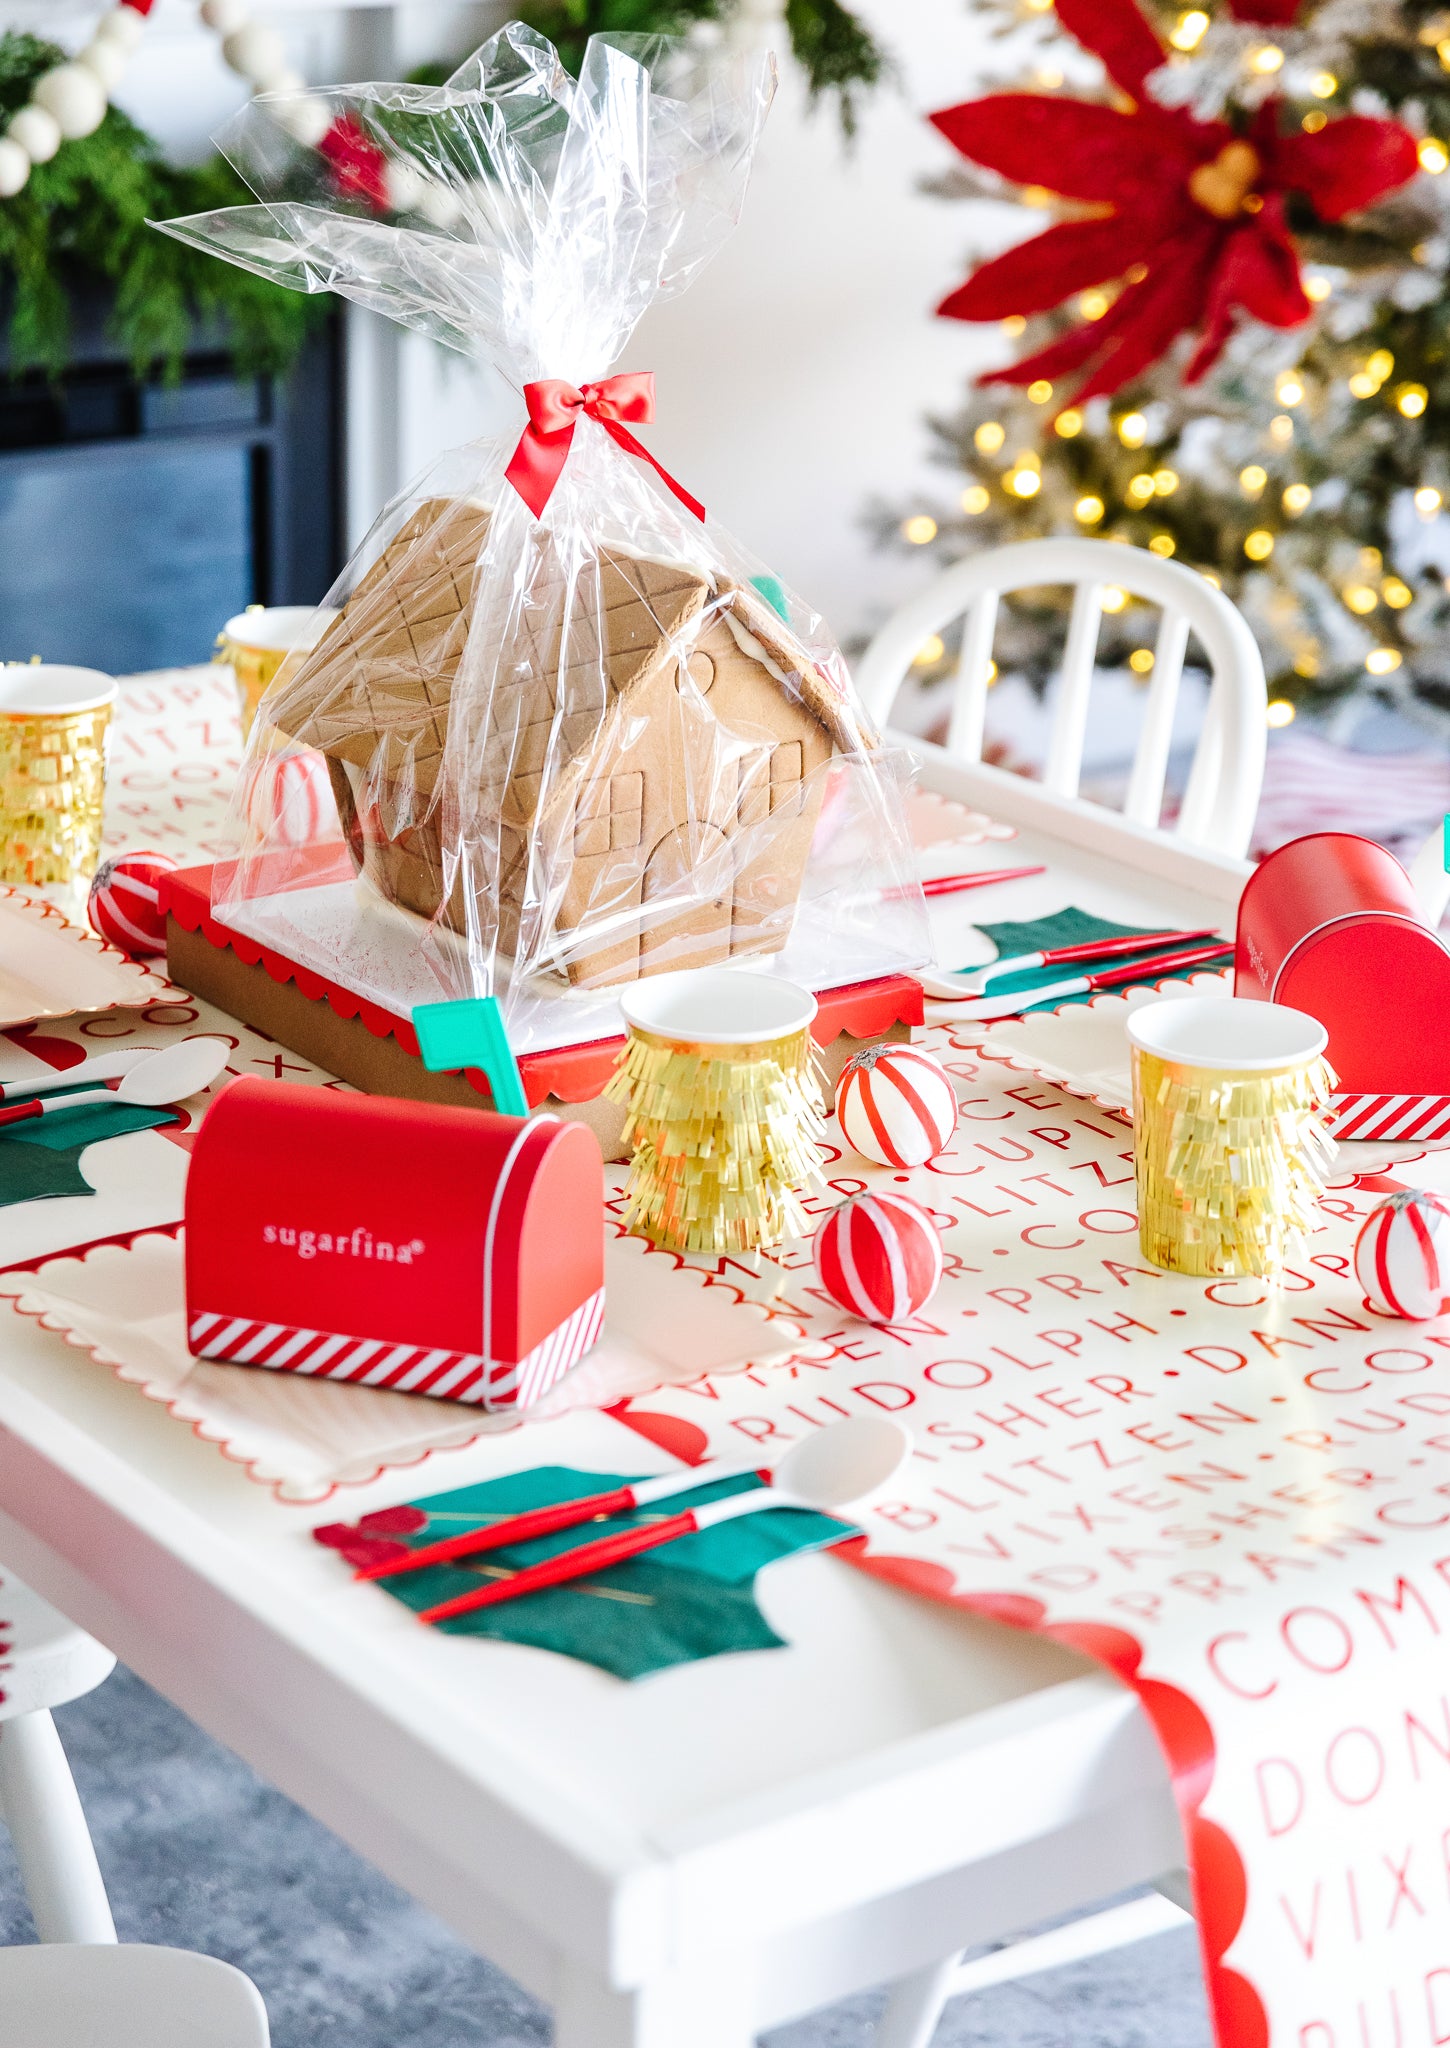 Kid's Christmas treats and party favor ideas.